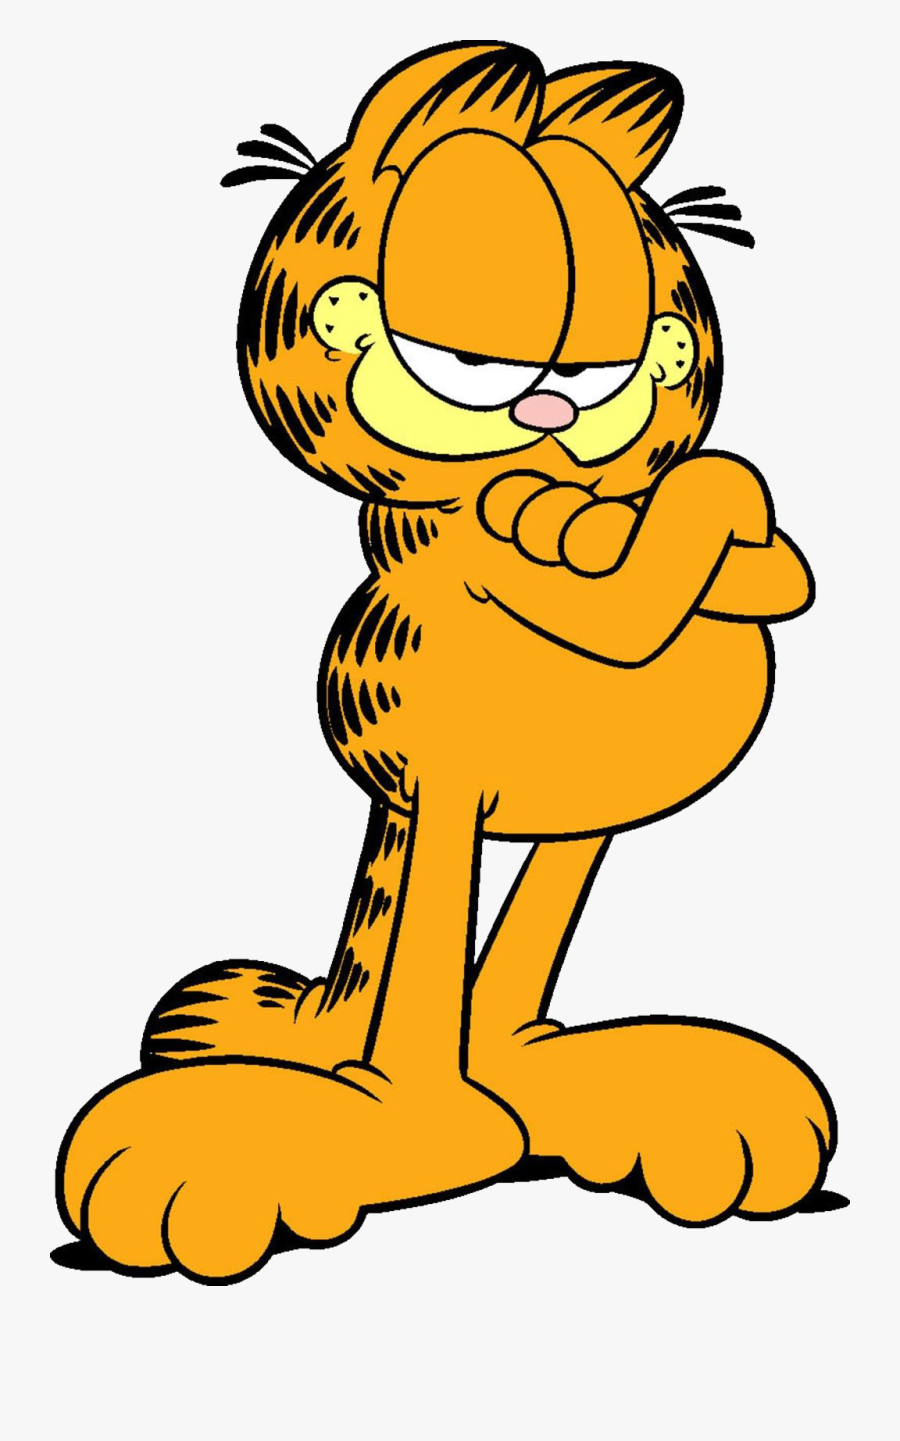 Garfield Png Image Download - Garfield The Cat, Transparent Clipart